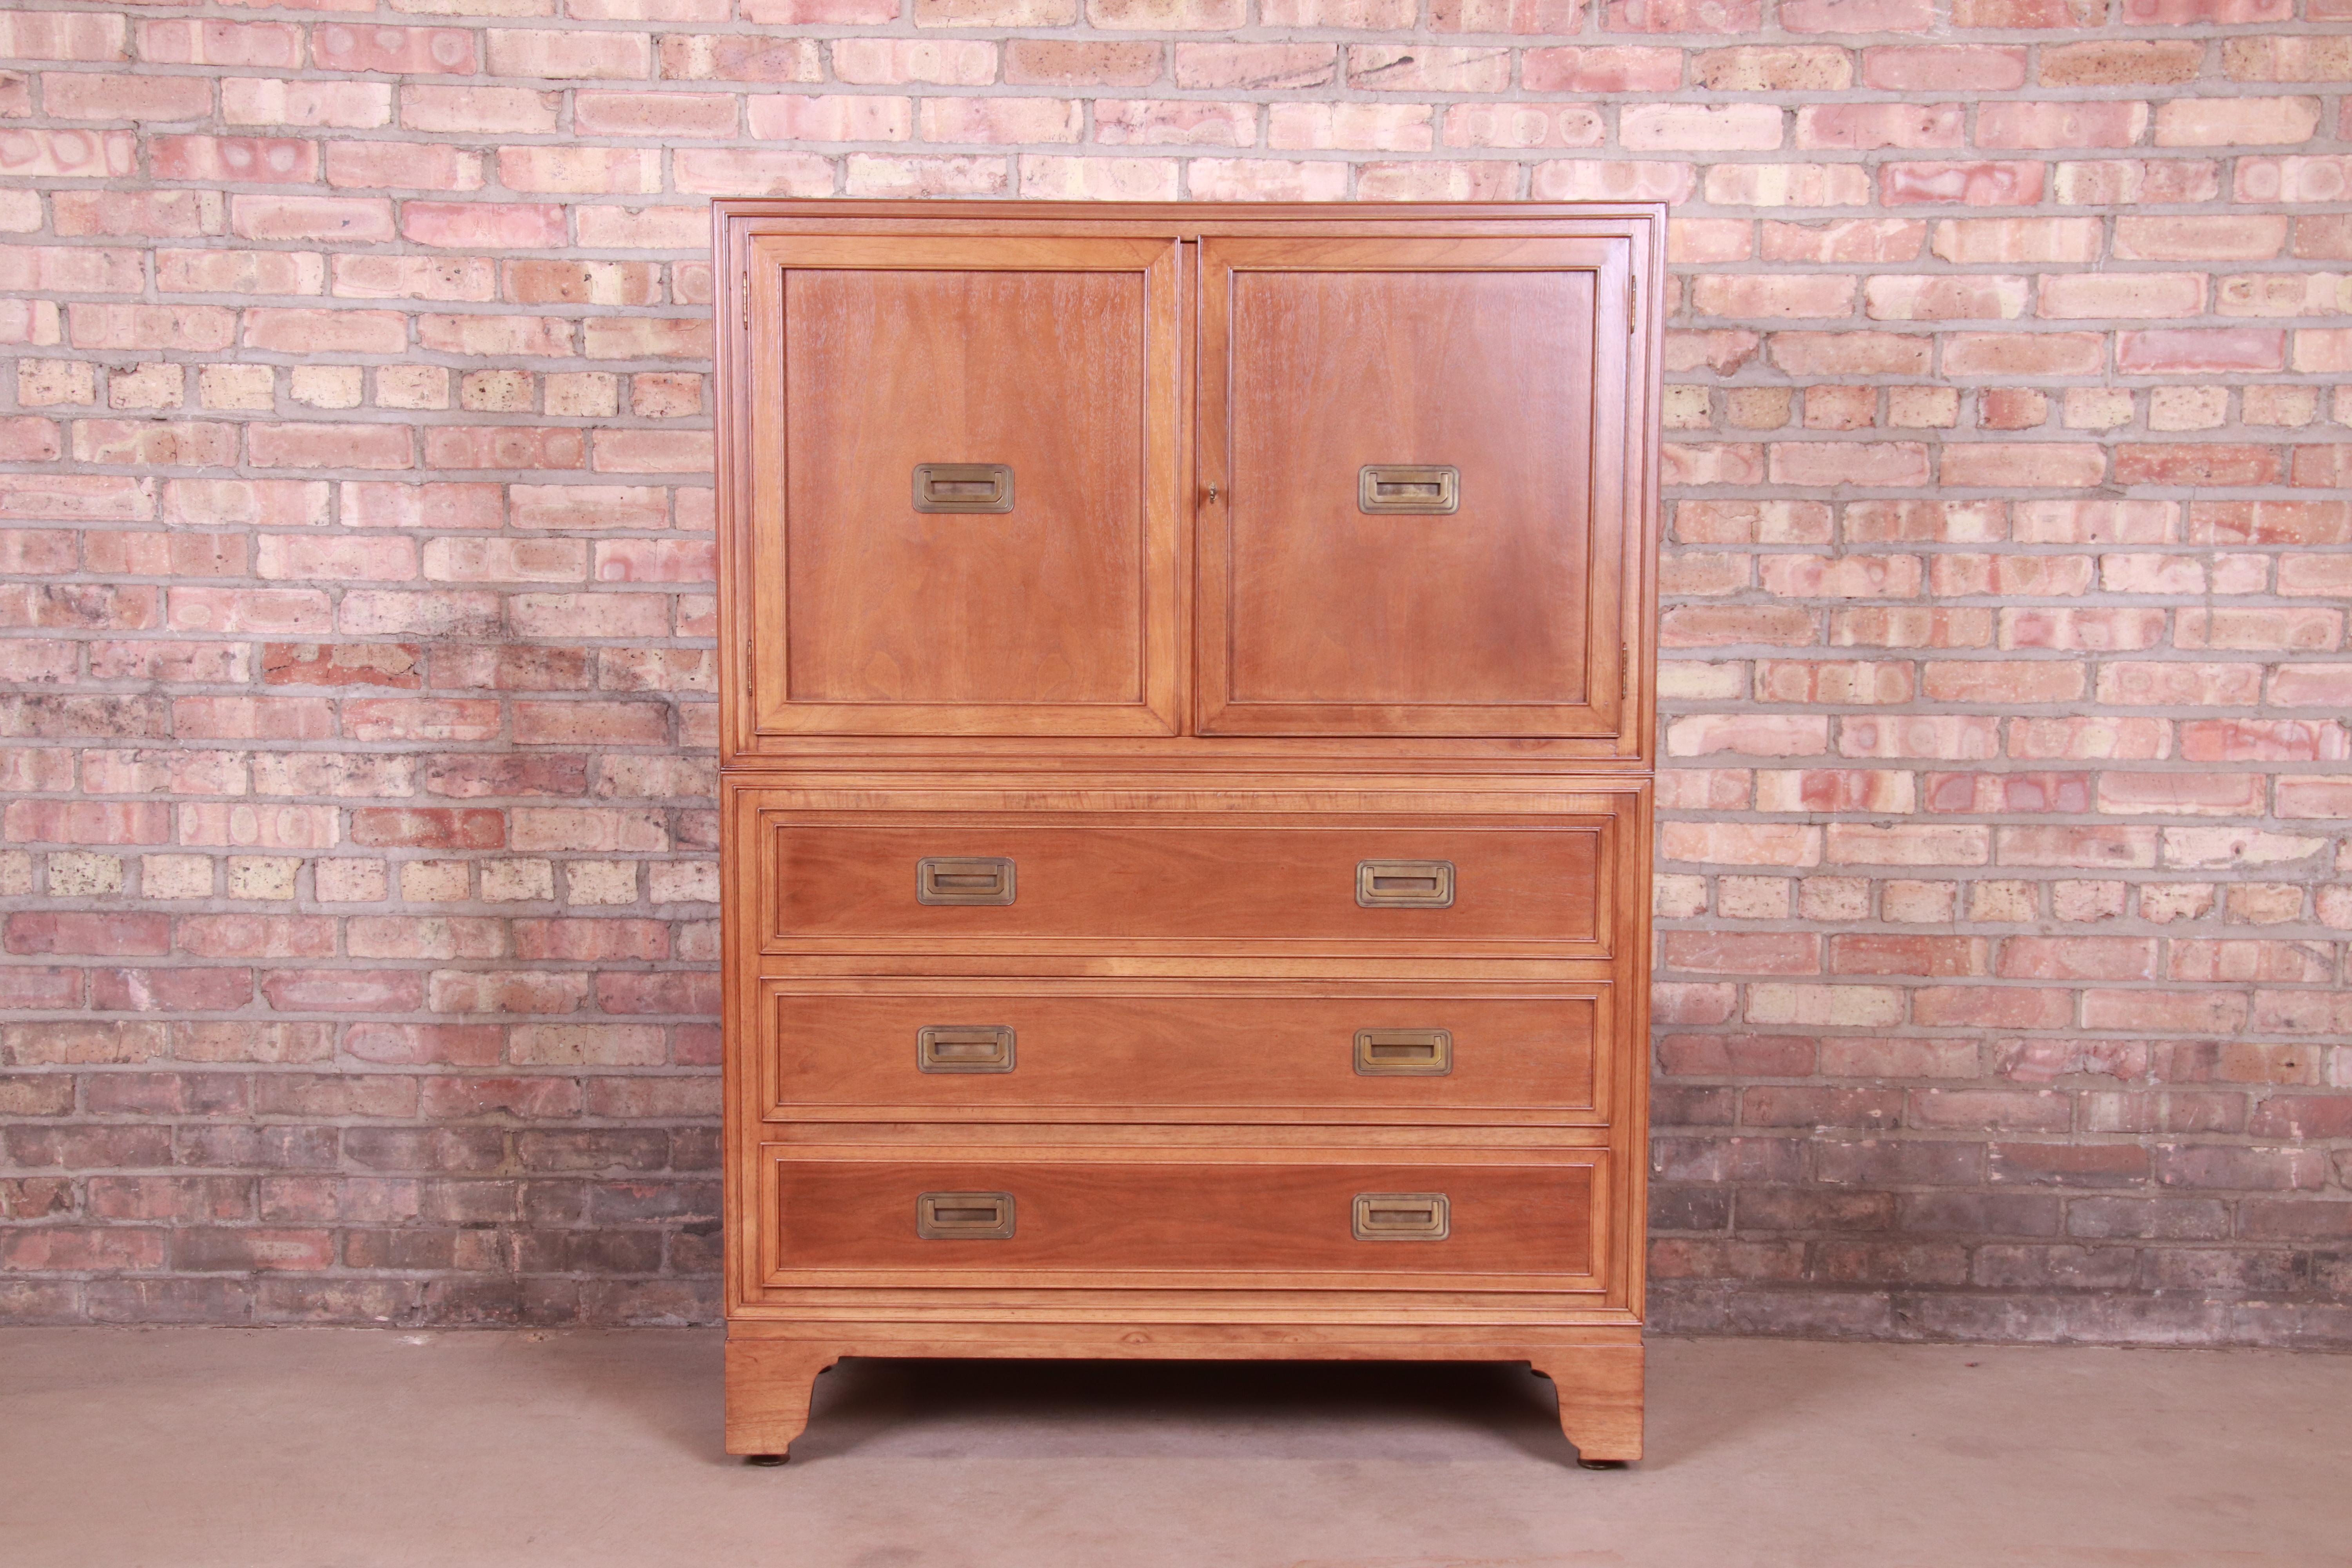 An exceptional Mid-Century Modern Hollywood Regency Campaign style gentleman's chest or highboy dresser

By Baker Furniture 